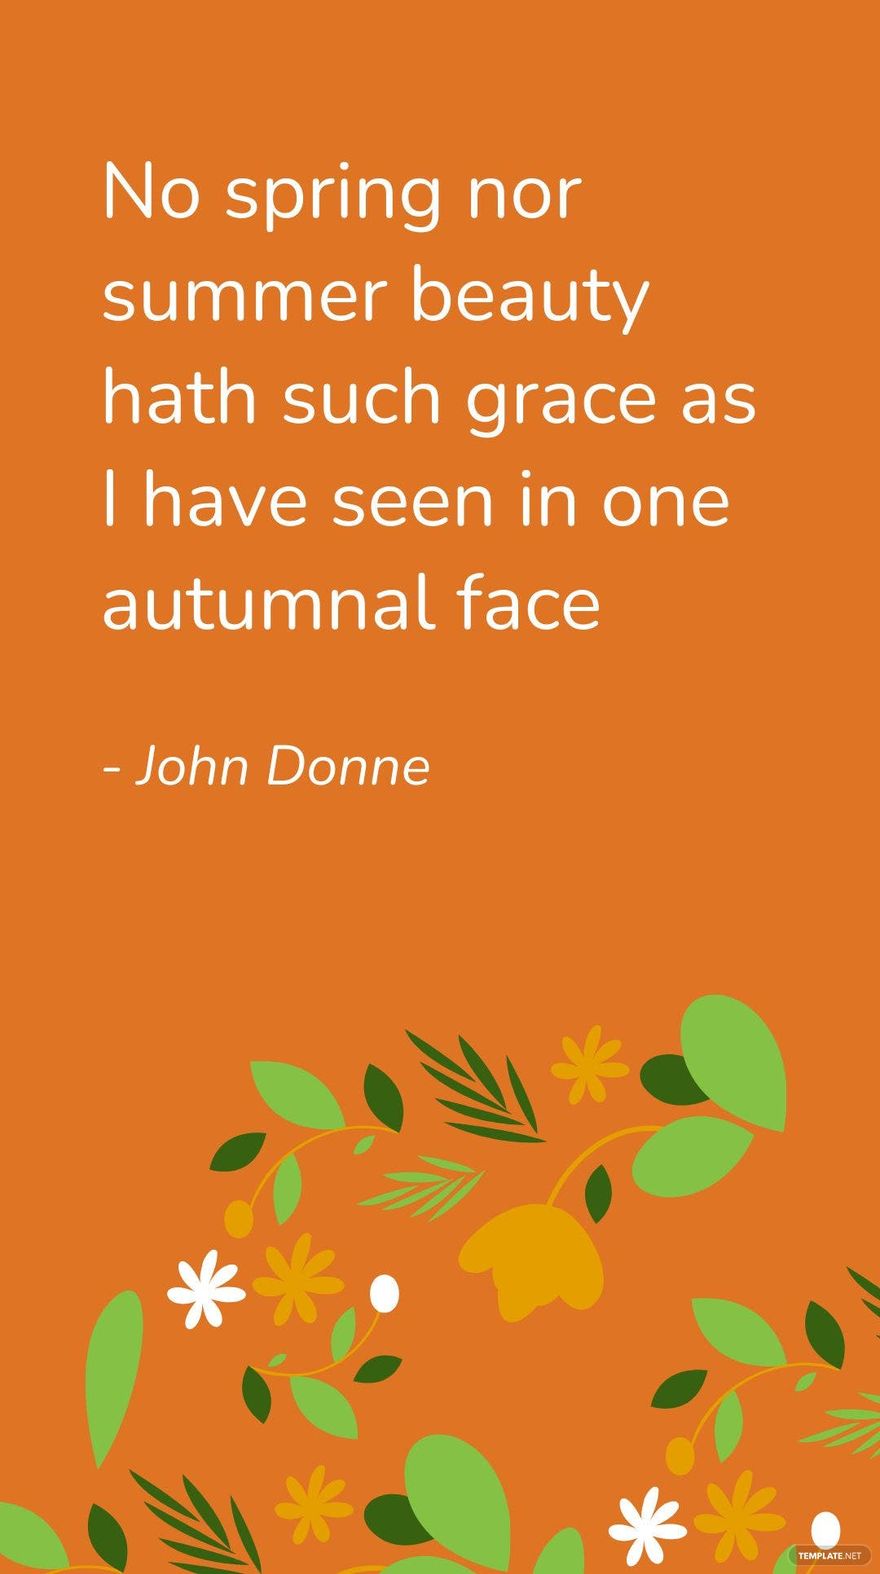 Free John Donne - No spring nor summer beauty hath such grace as I have seen in one autumnal face in JPG